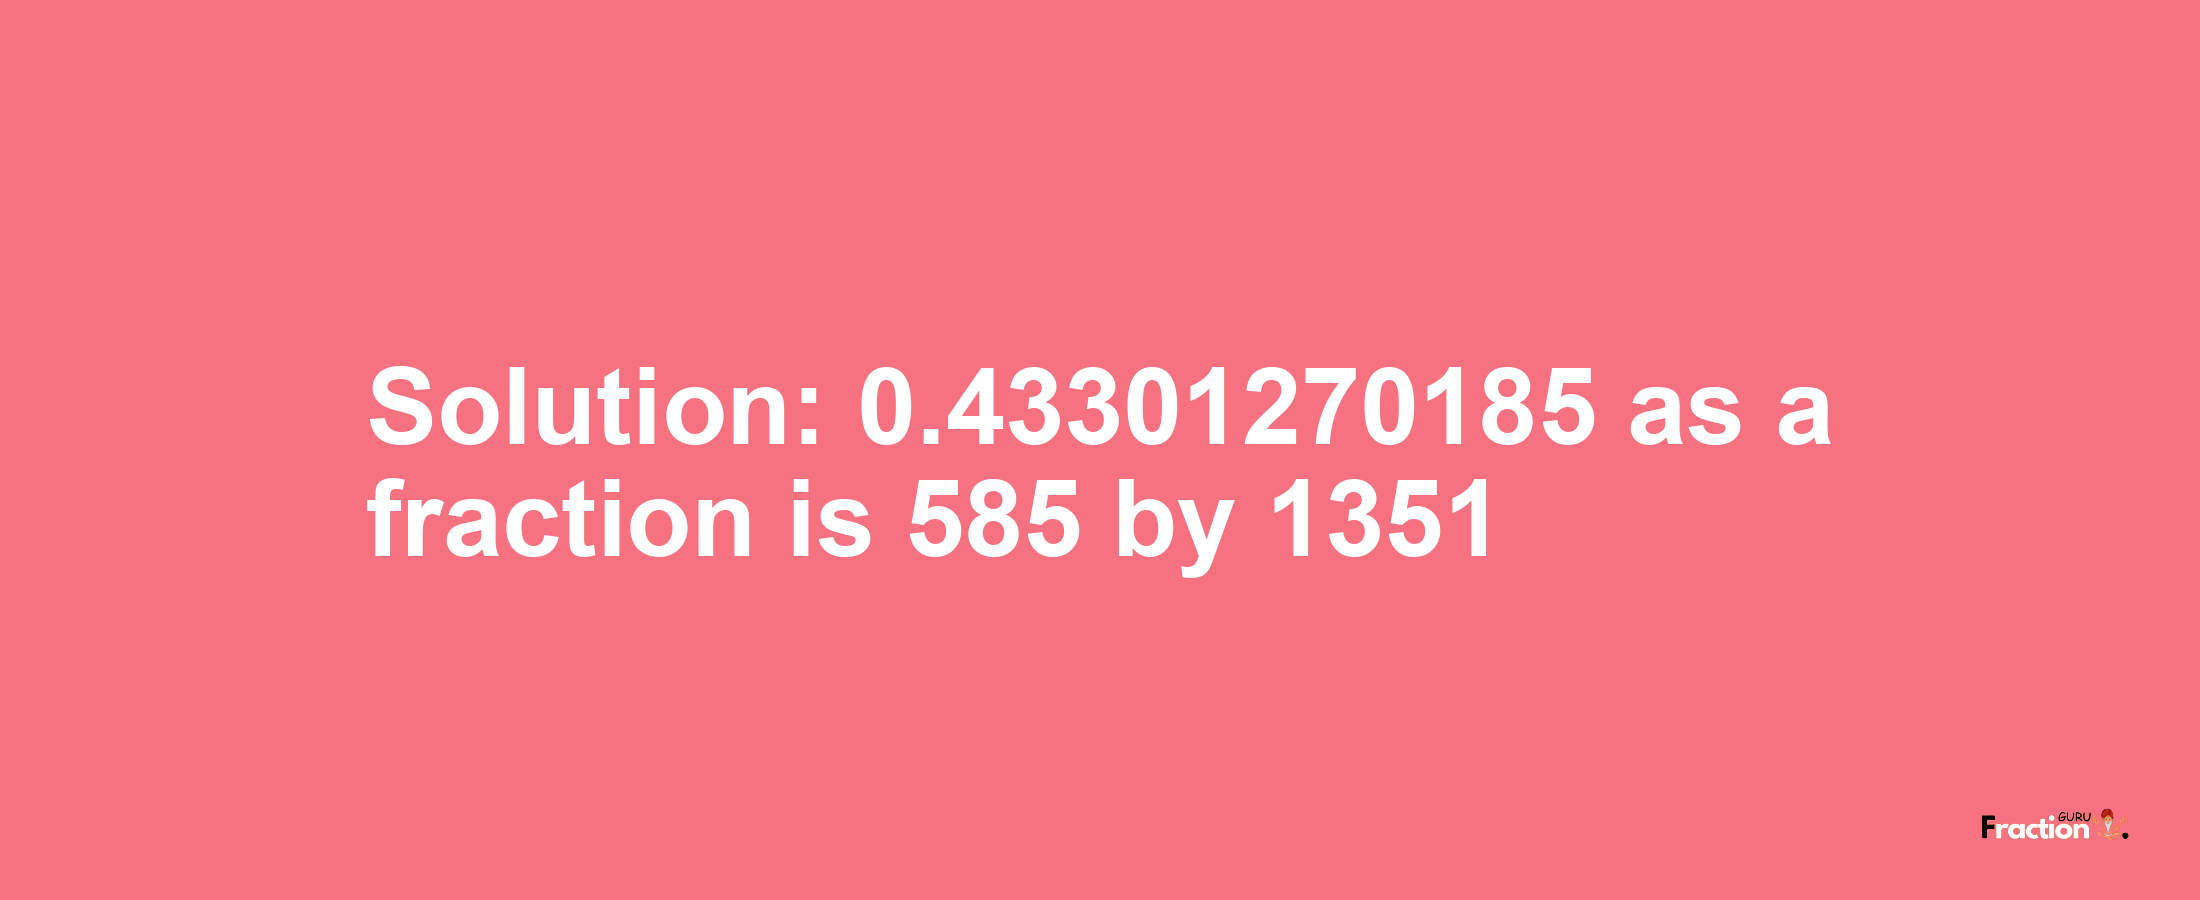 Solution:0.43301270185 as a fraction is 585/1351